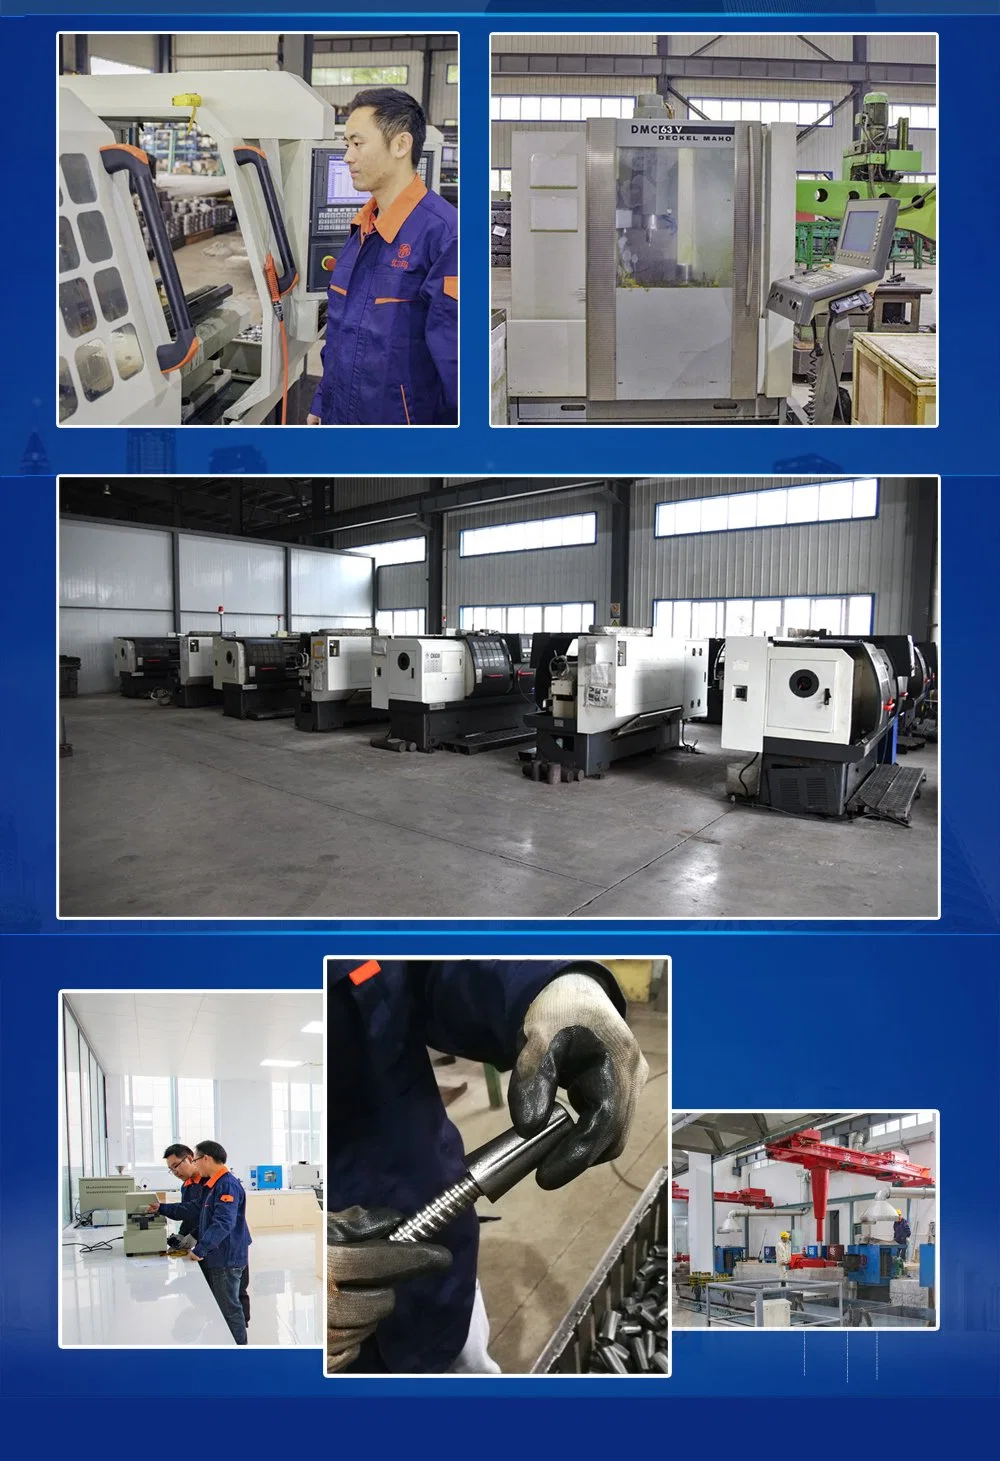 Casting, Mining, Equipment, Nuts, Substation, Power Fitting, Wire System, Connecting, Forging, Pressing, Car